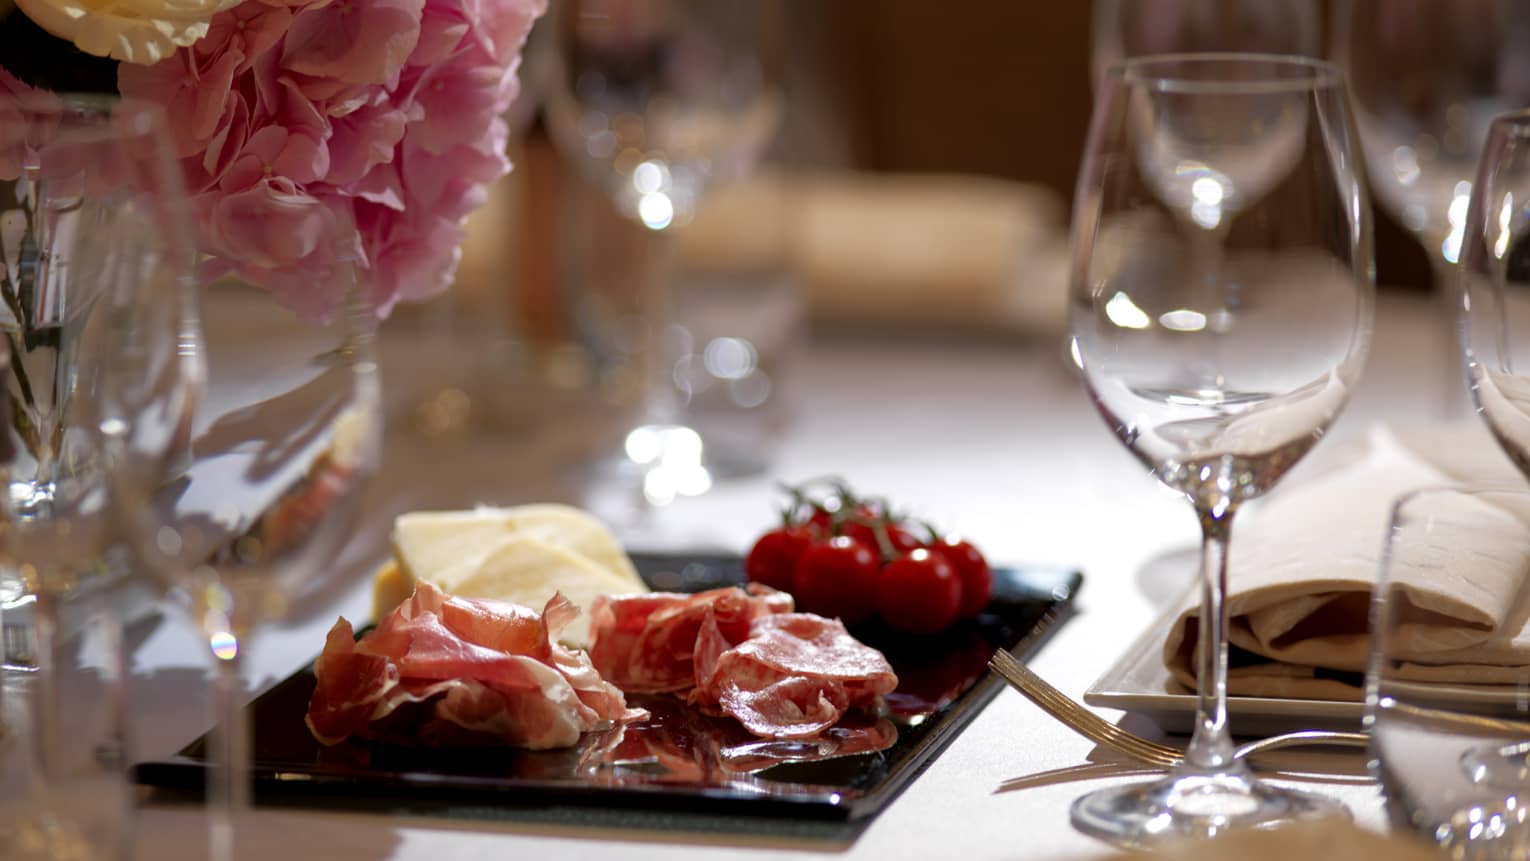 Close-up of small charcuterie platter with cured meat, tomato, cheese on banquet table